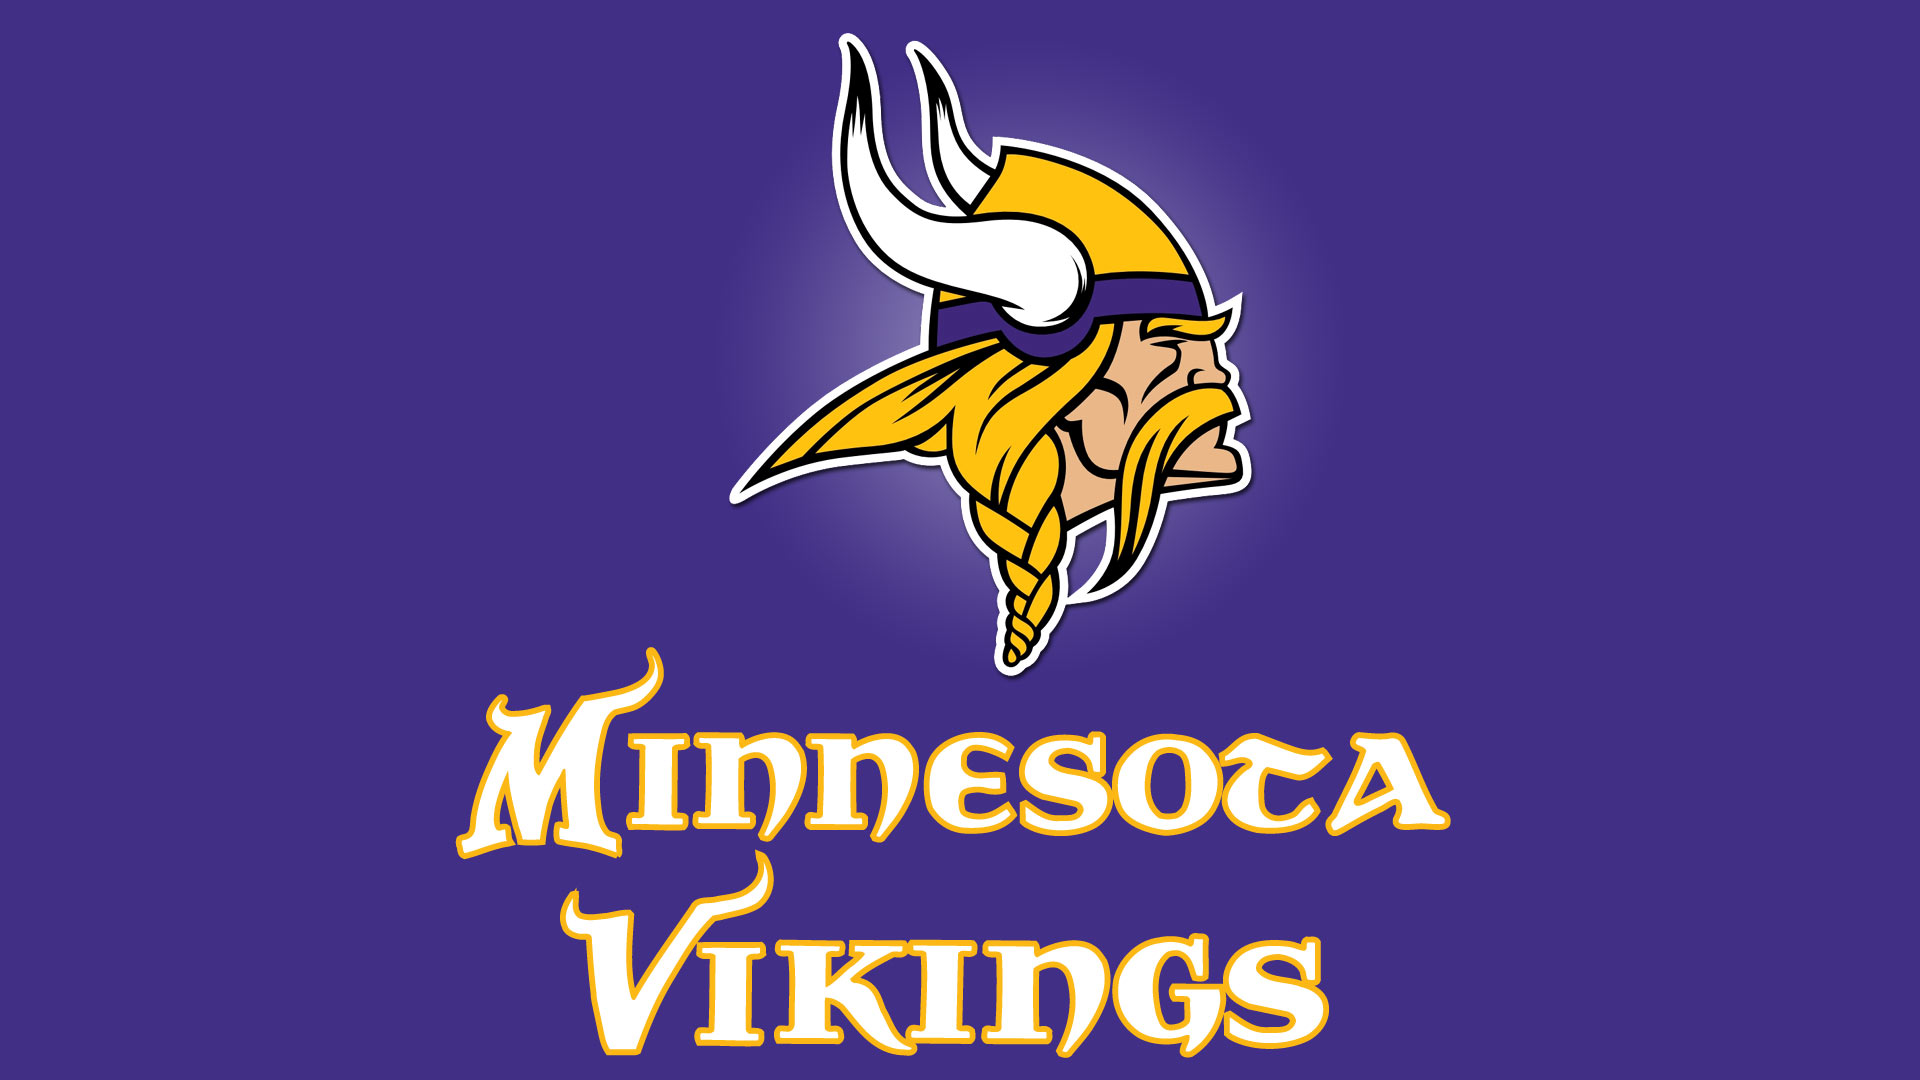 Simple Minnesota Vikings Emblem Image Amp Pictures Becuo